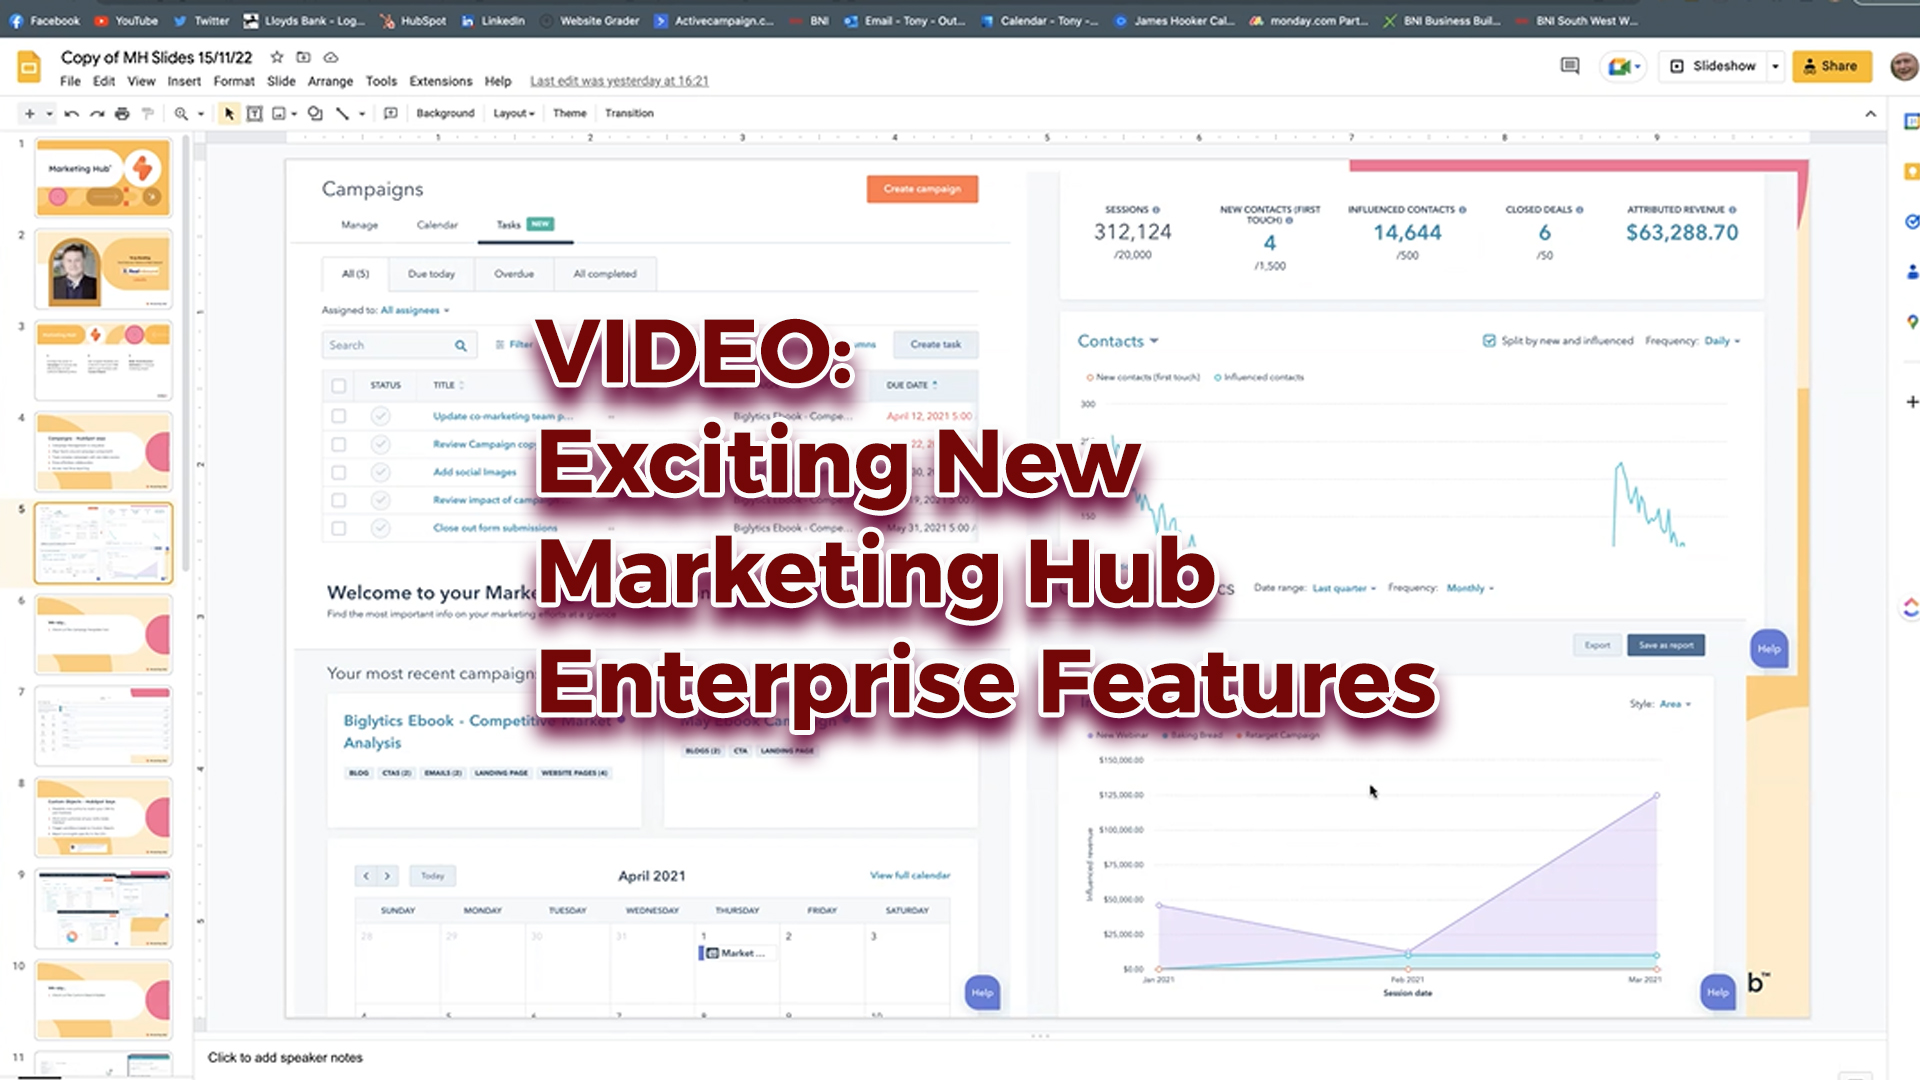 VIDEO: Exciting New Marketing Hub Enterprise Features 